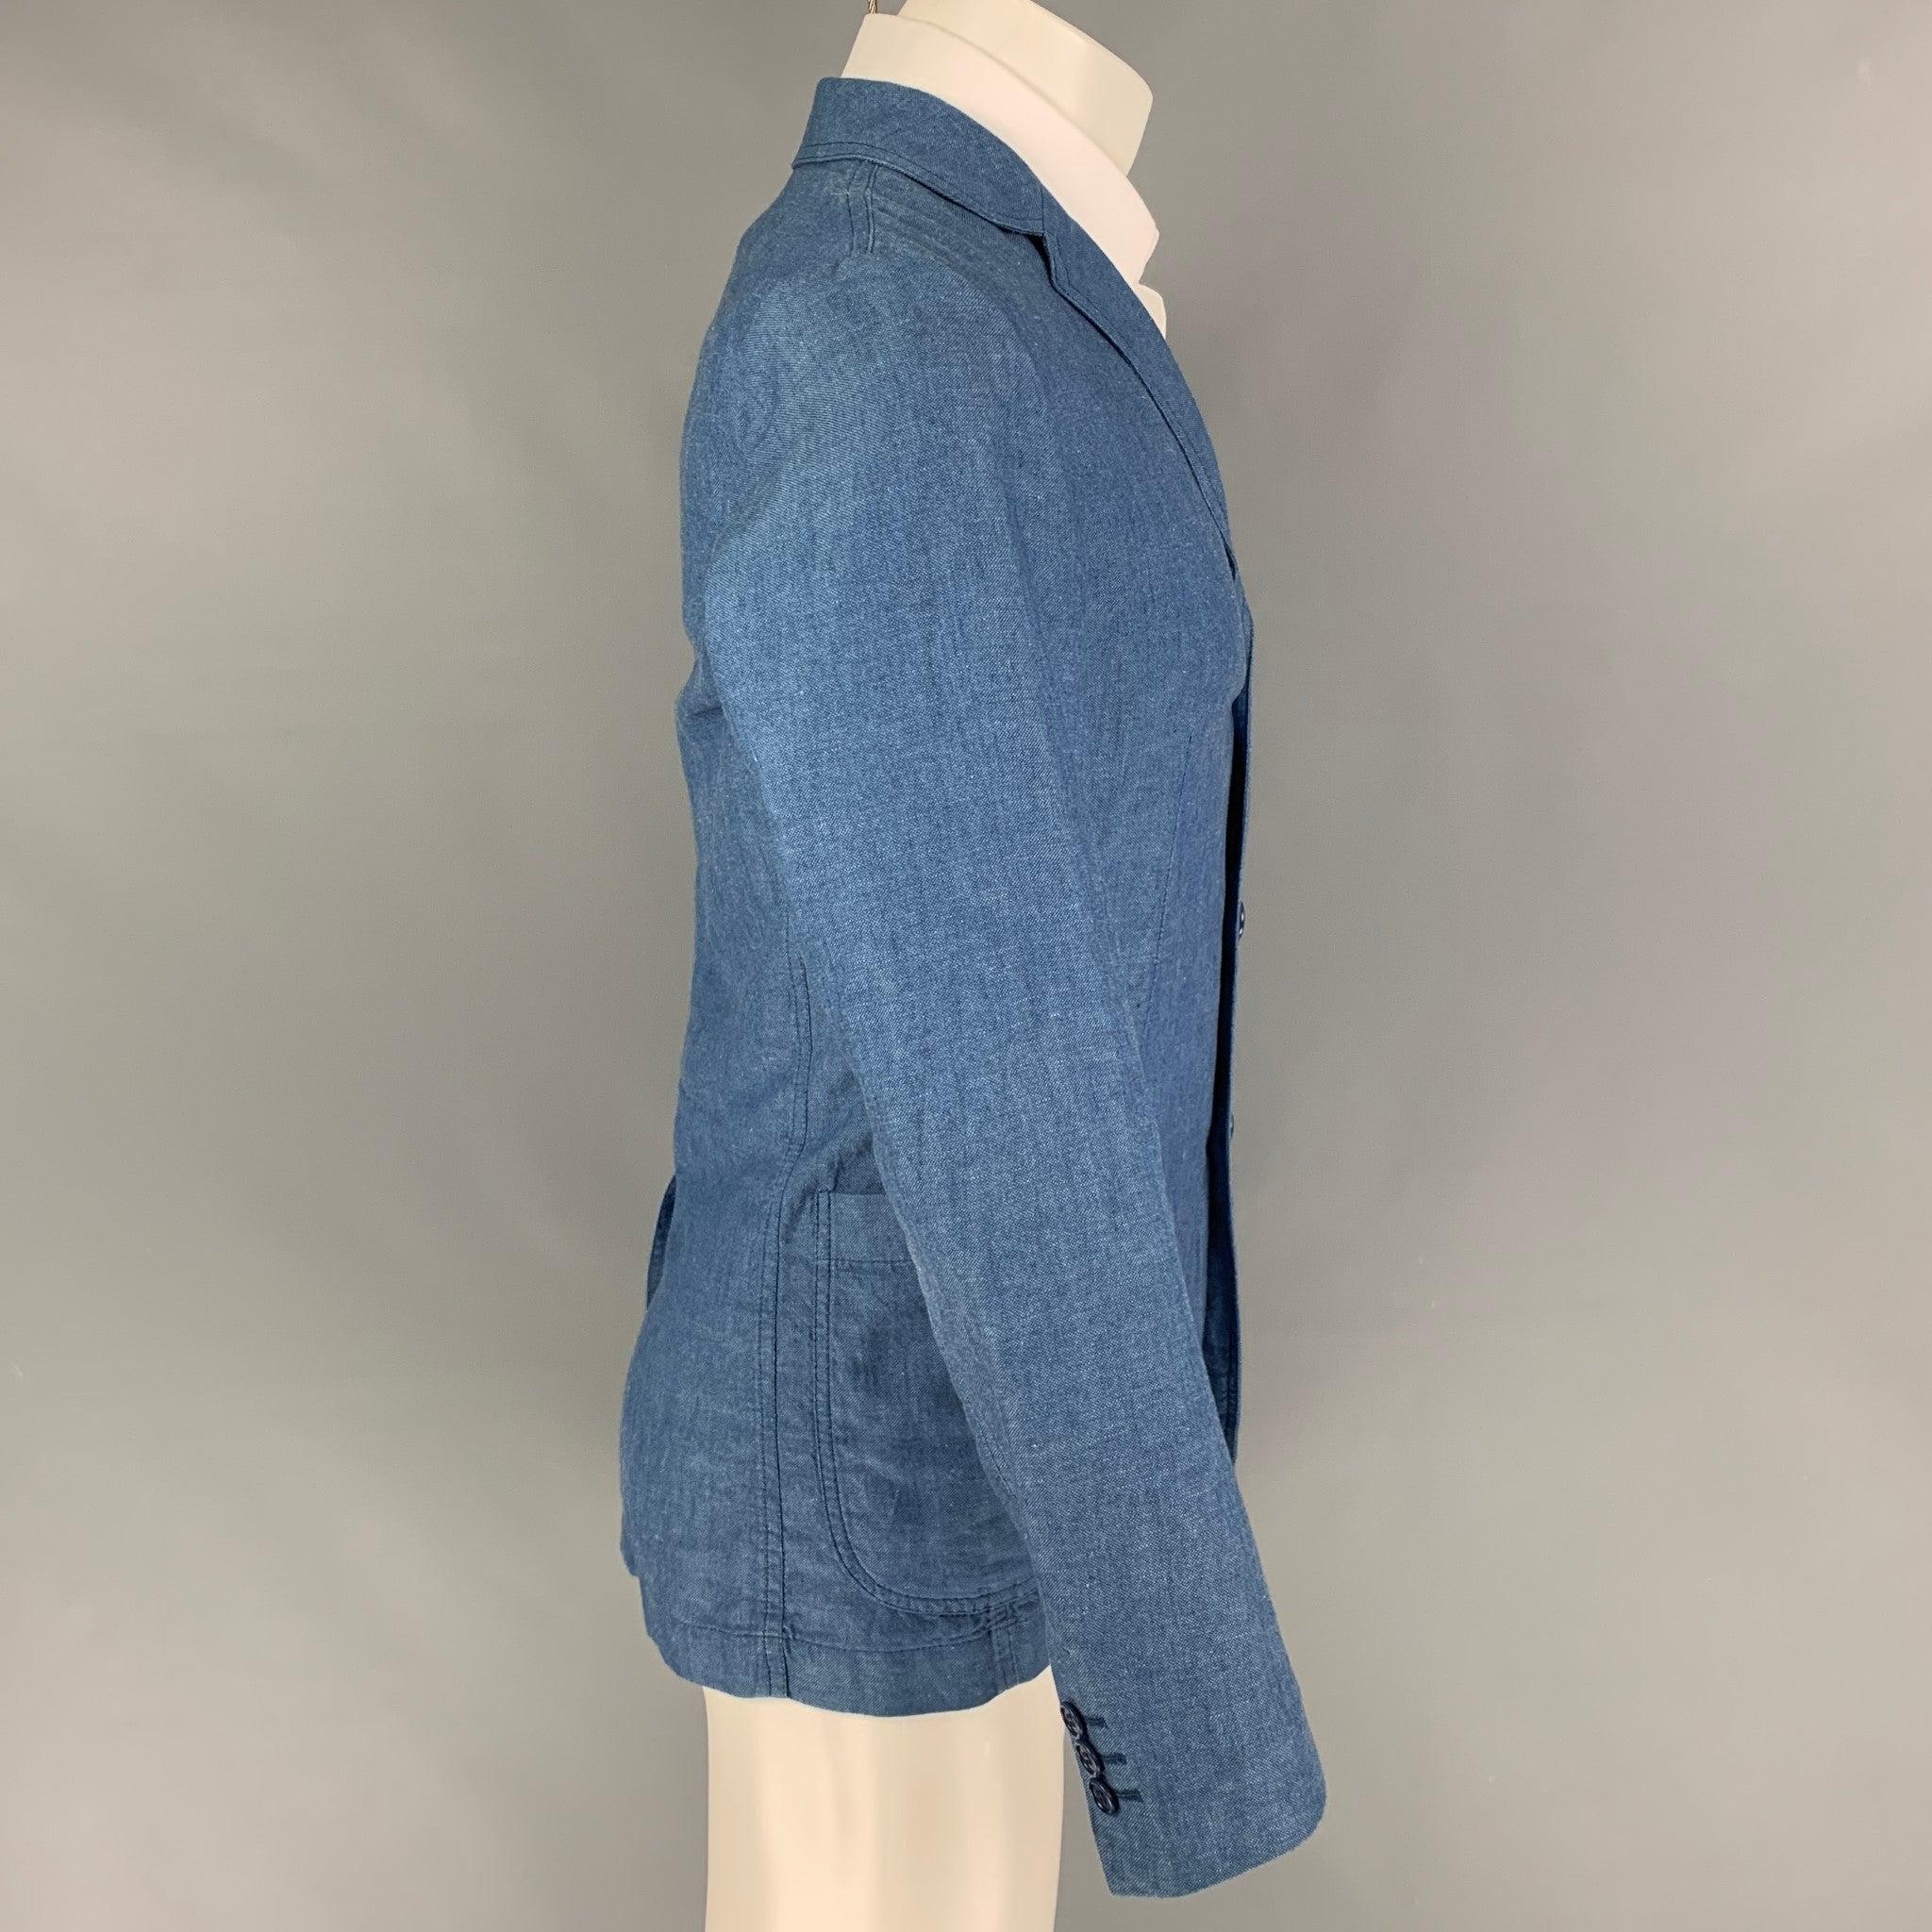 ASPESI sport coat comes in a blue cotton / linen featuring a notch lapel, patch pockets, single back vent, and a three button closure. Made in Italy.
Very Good
Pre-Owned Condition. 

Marked:   XS 

Measurements: 
 
Shoulder: 16.5 inches  Chest: 36